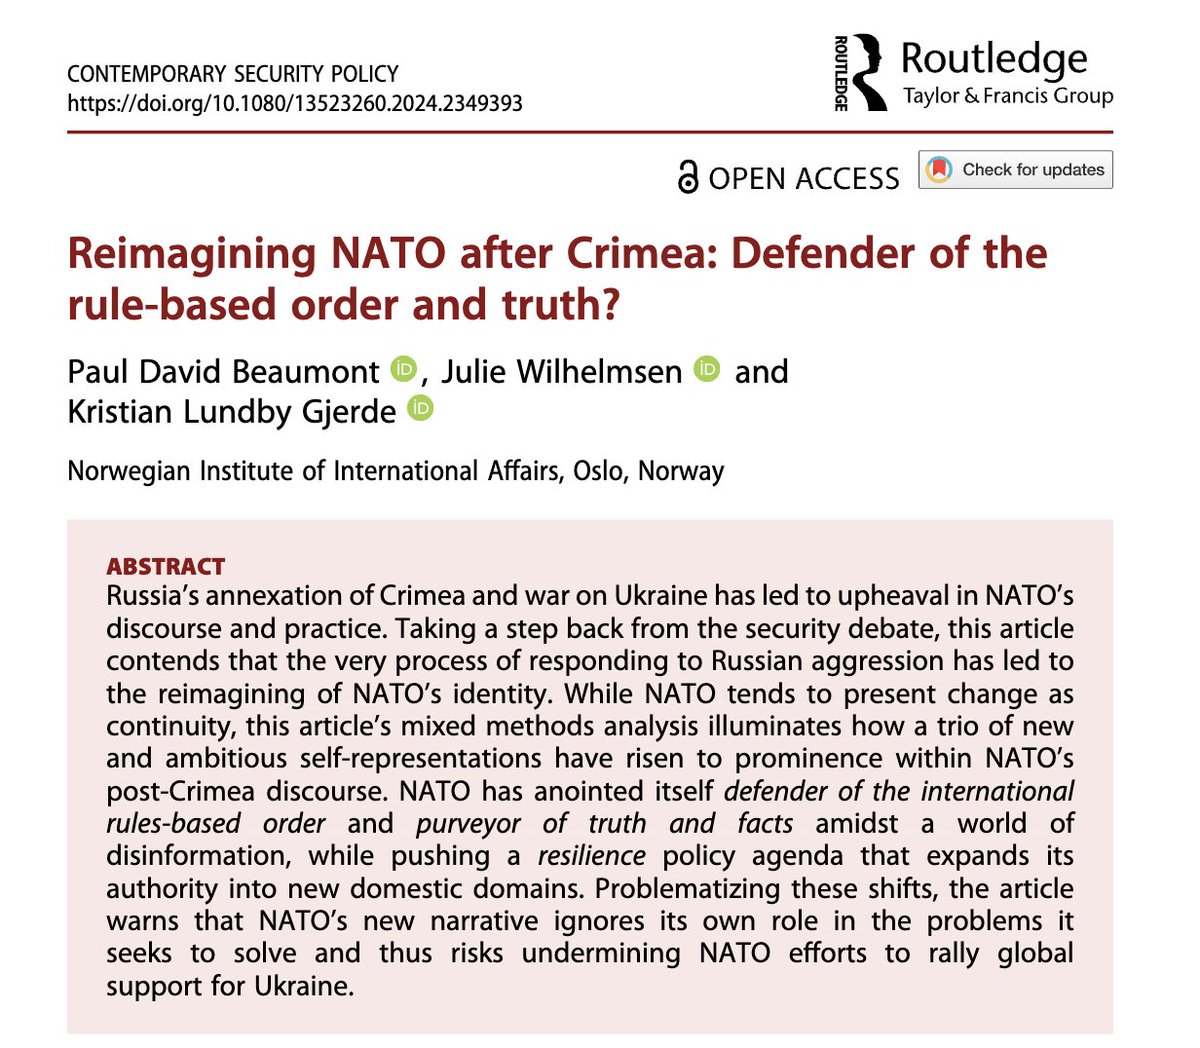 Publication Alert 🐳! How has NATO’s narrative of the self changed since Russia’s annexation of Crimea? Is the new narrative fit for purpose or does it undermine NATO's own stated goals? Our new piece in @CSP_journal tackles these questions. A short 🧵on this long article 👇